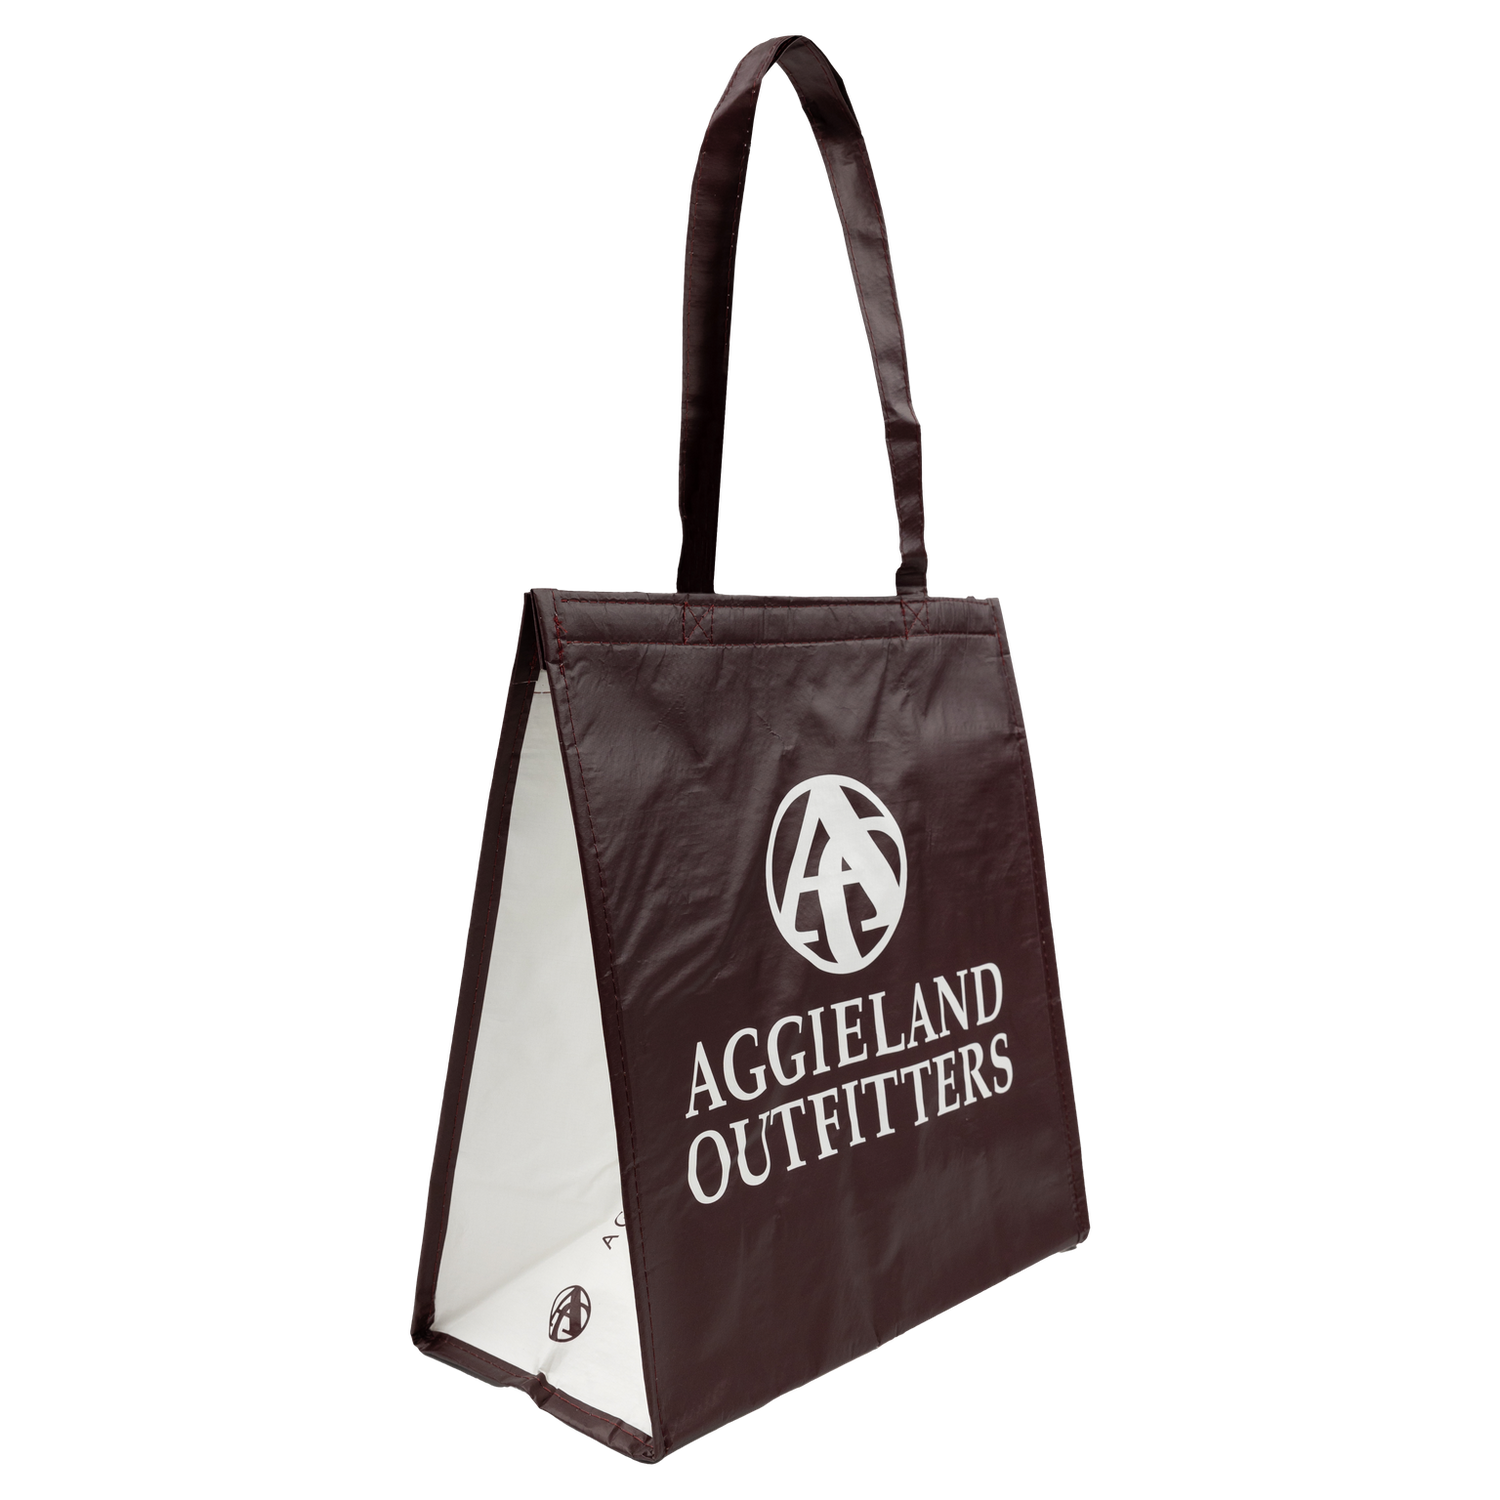 Aggieland Outfitters Insulated Bag